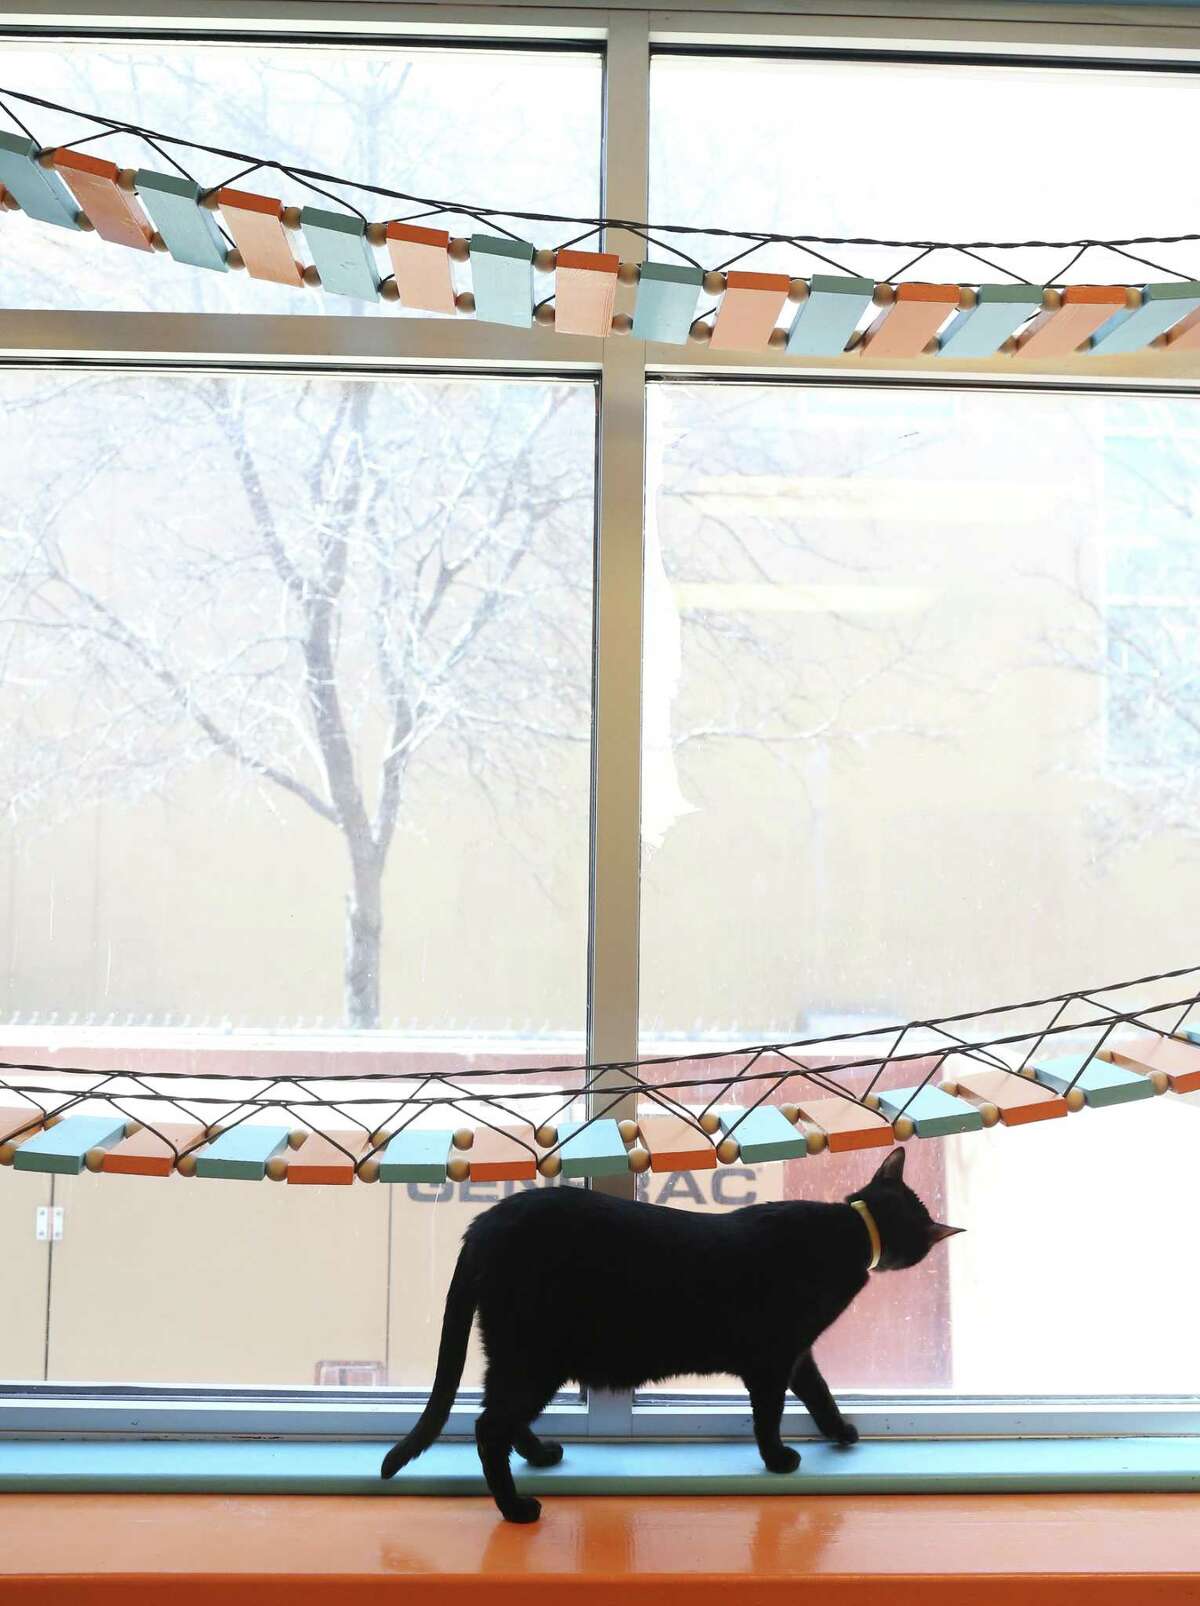 A cat looks out the window of the Haven for Hope cattery on Feb. 26, 2018. The $12,000 cattery renovation was funded by the nonprofit, The Jackson Galaxy Project, and constructed by Rescue Build, a related nonprofit. The cattery and a dog kennel provide housing for pets owned by clients of Haven for Hope.